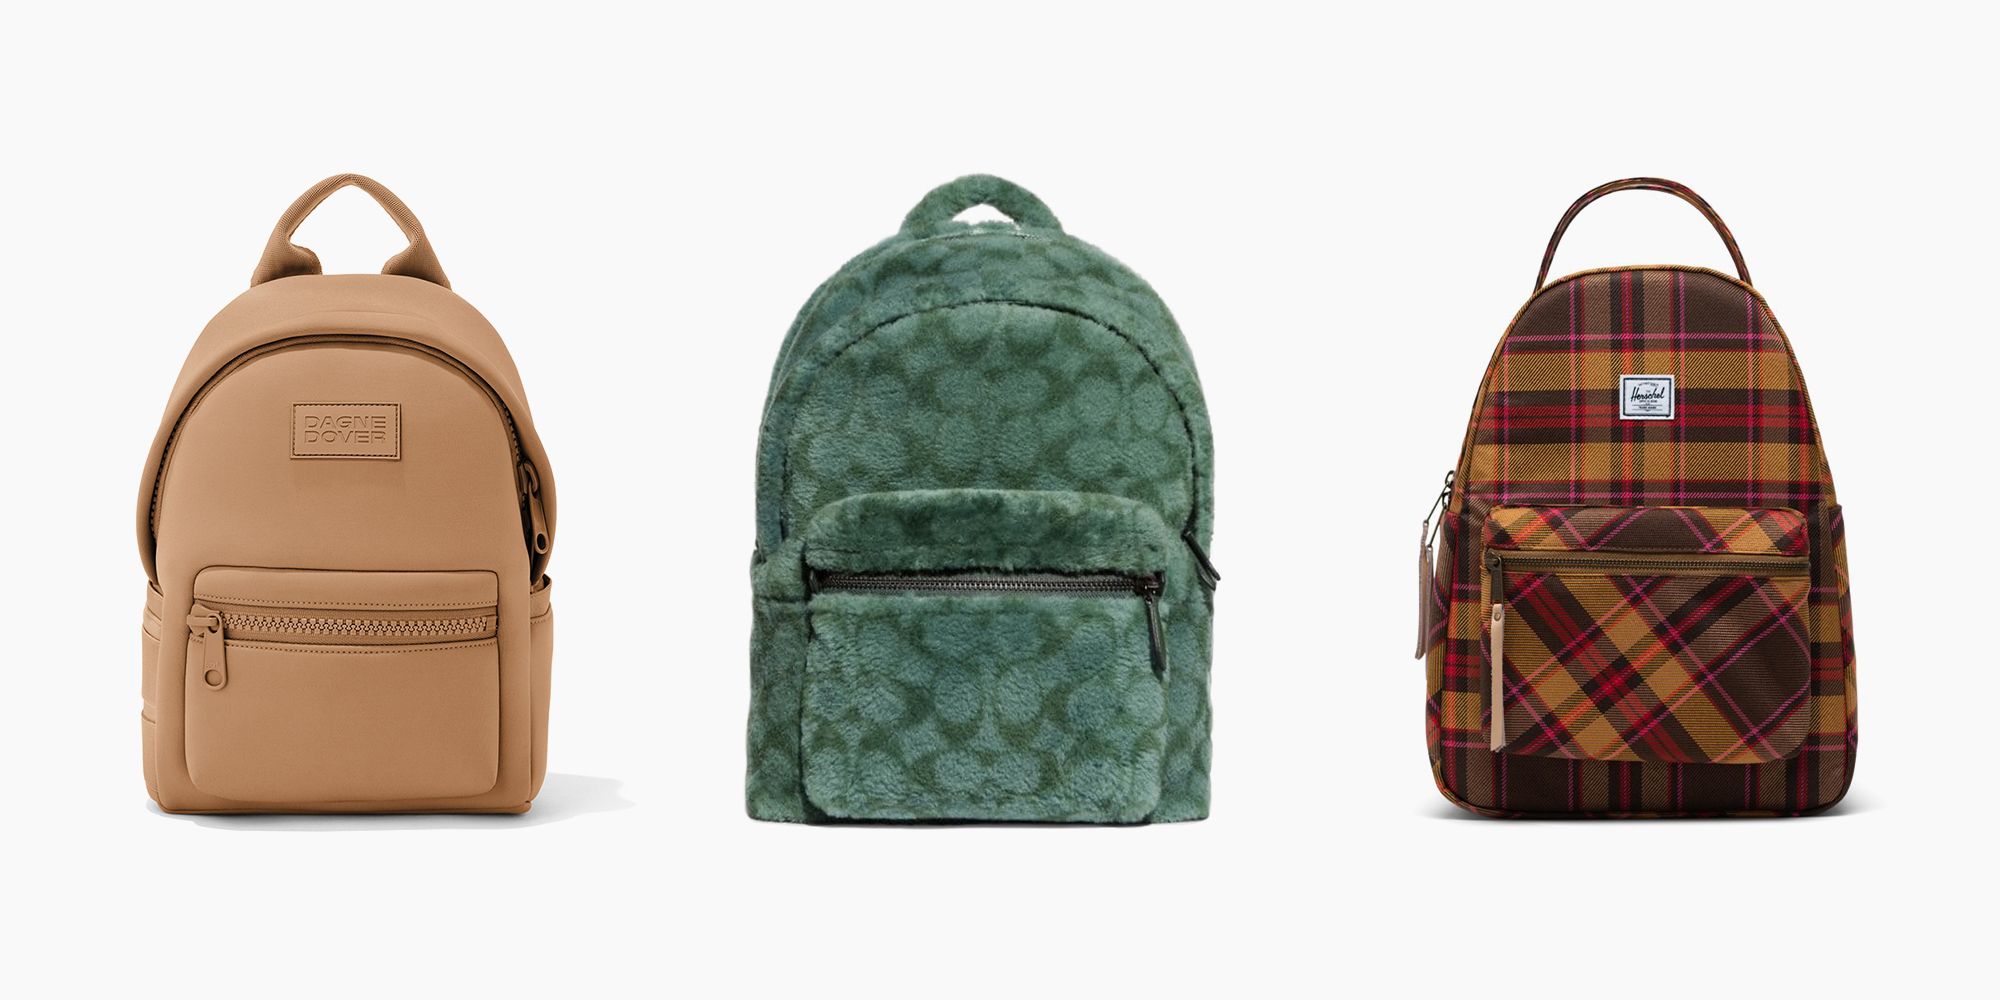 15 Travel Backpacks to Help Streamline Your Next Trip